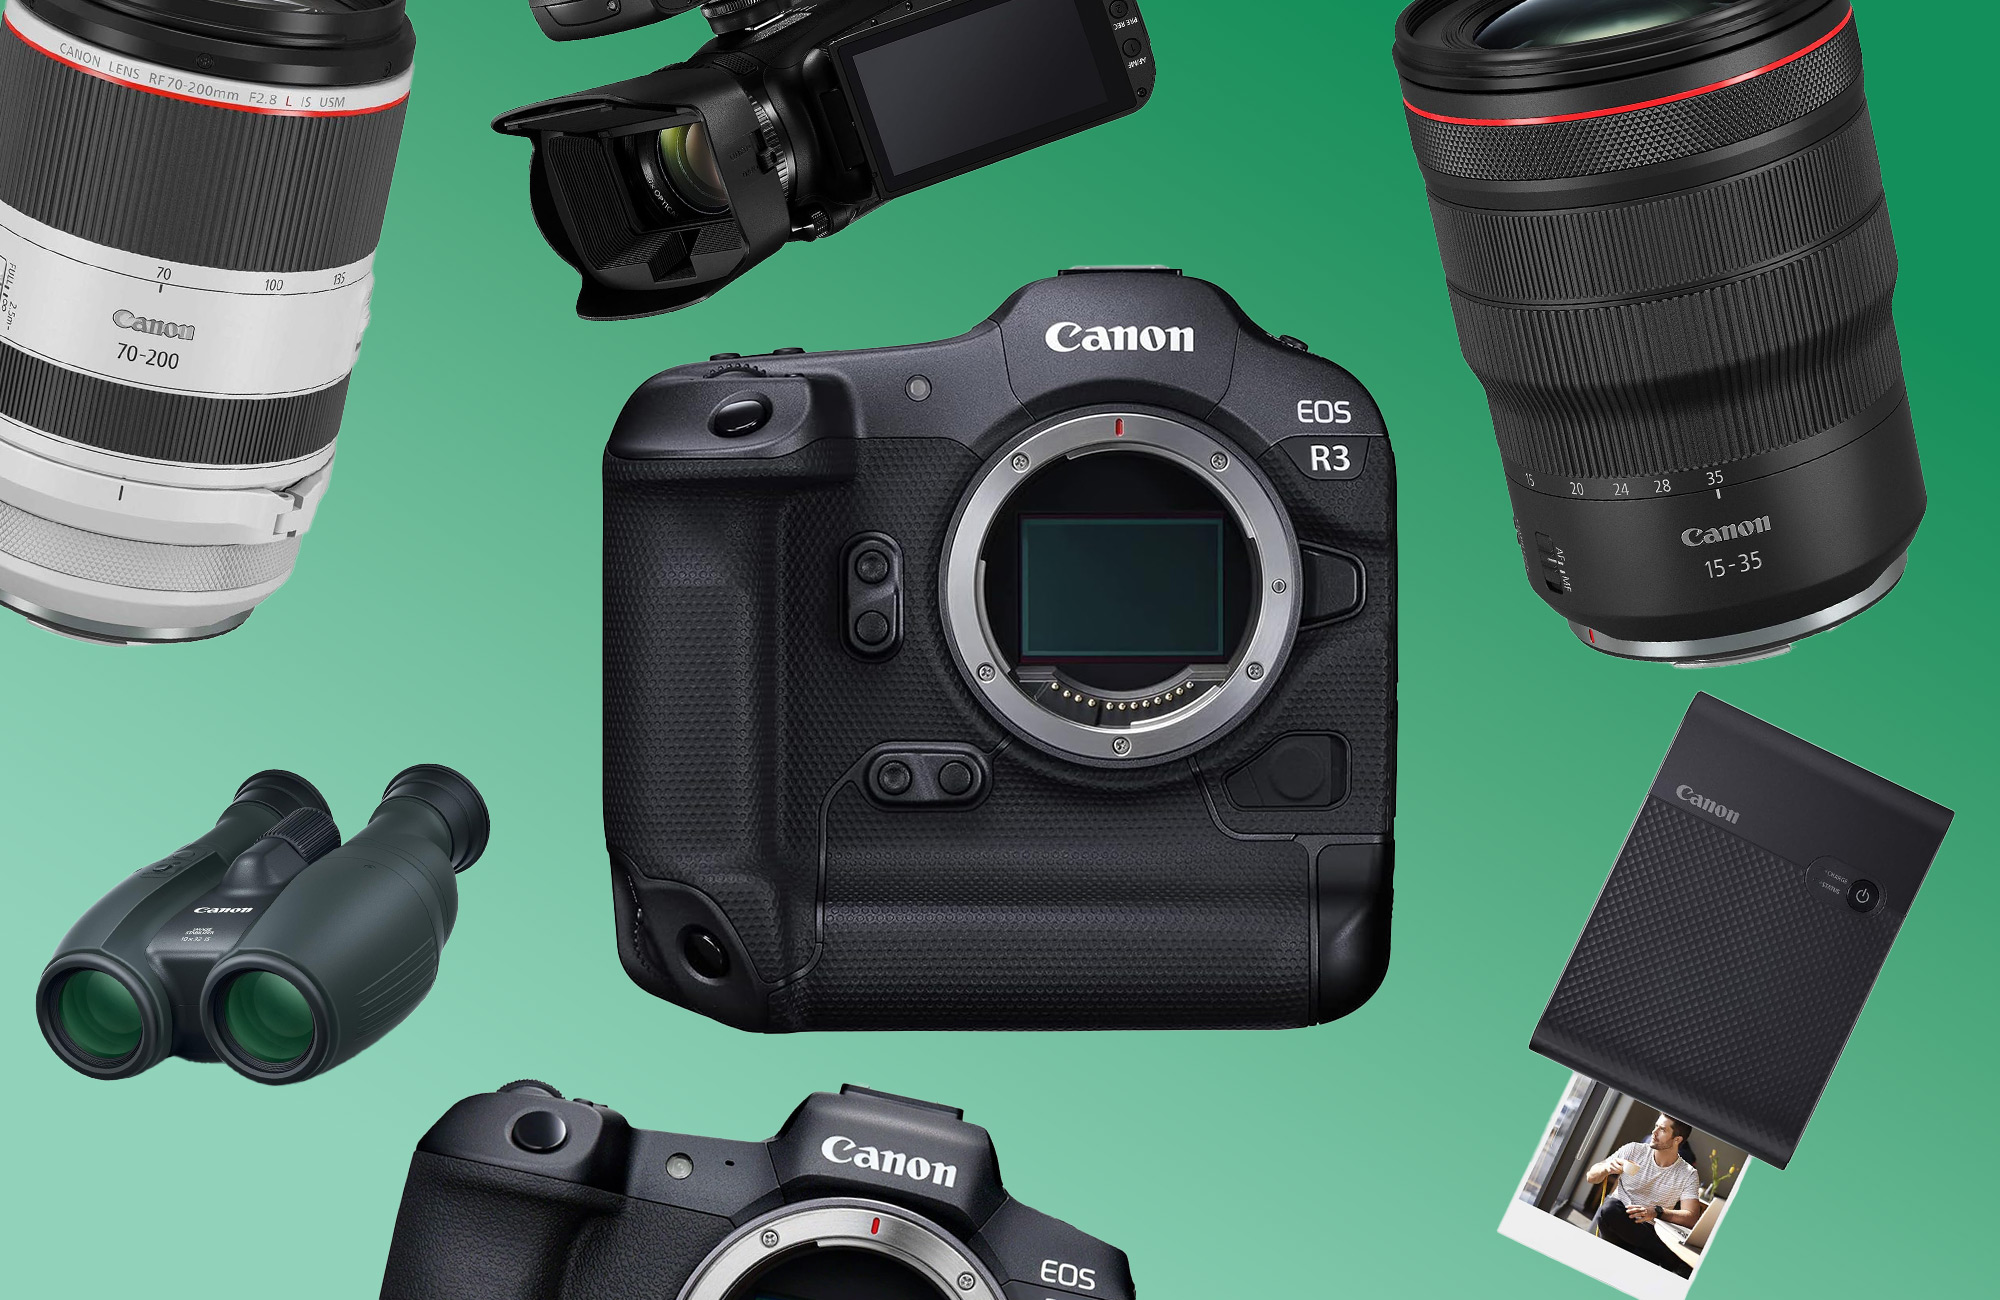 Best Canon Camera Deals: Save on camera bodies and lenses